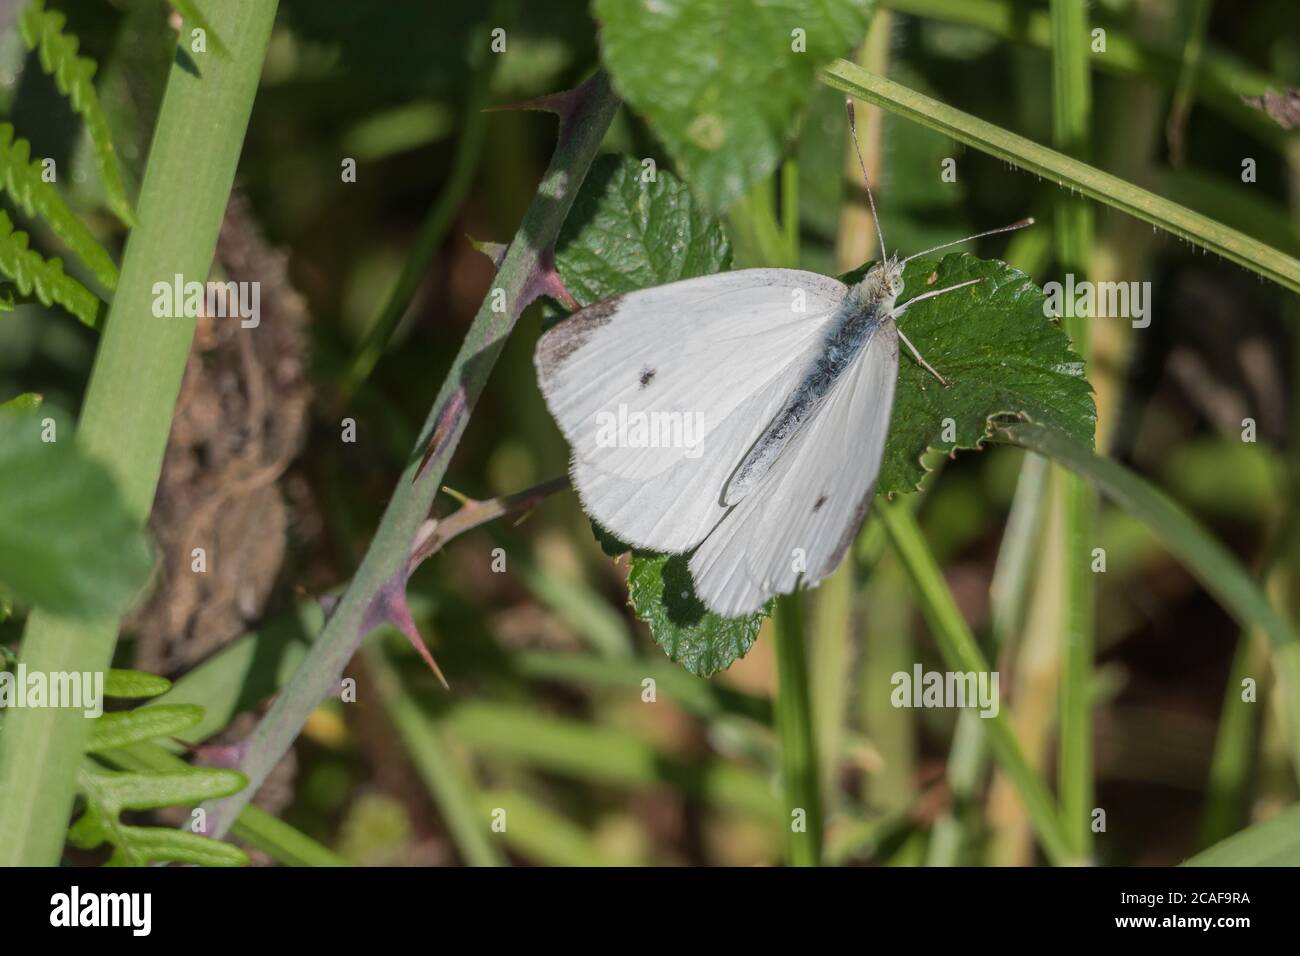 butterfly large white pieris brassicae perched on a blackberry plant leaf Stock Photo